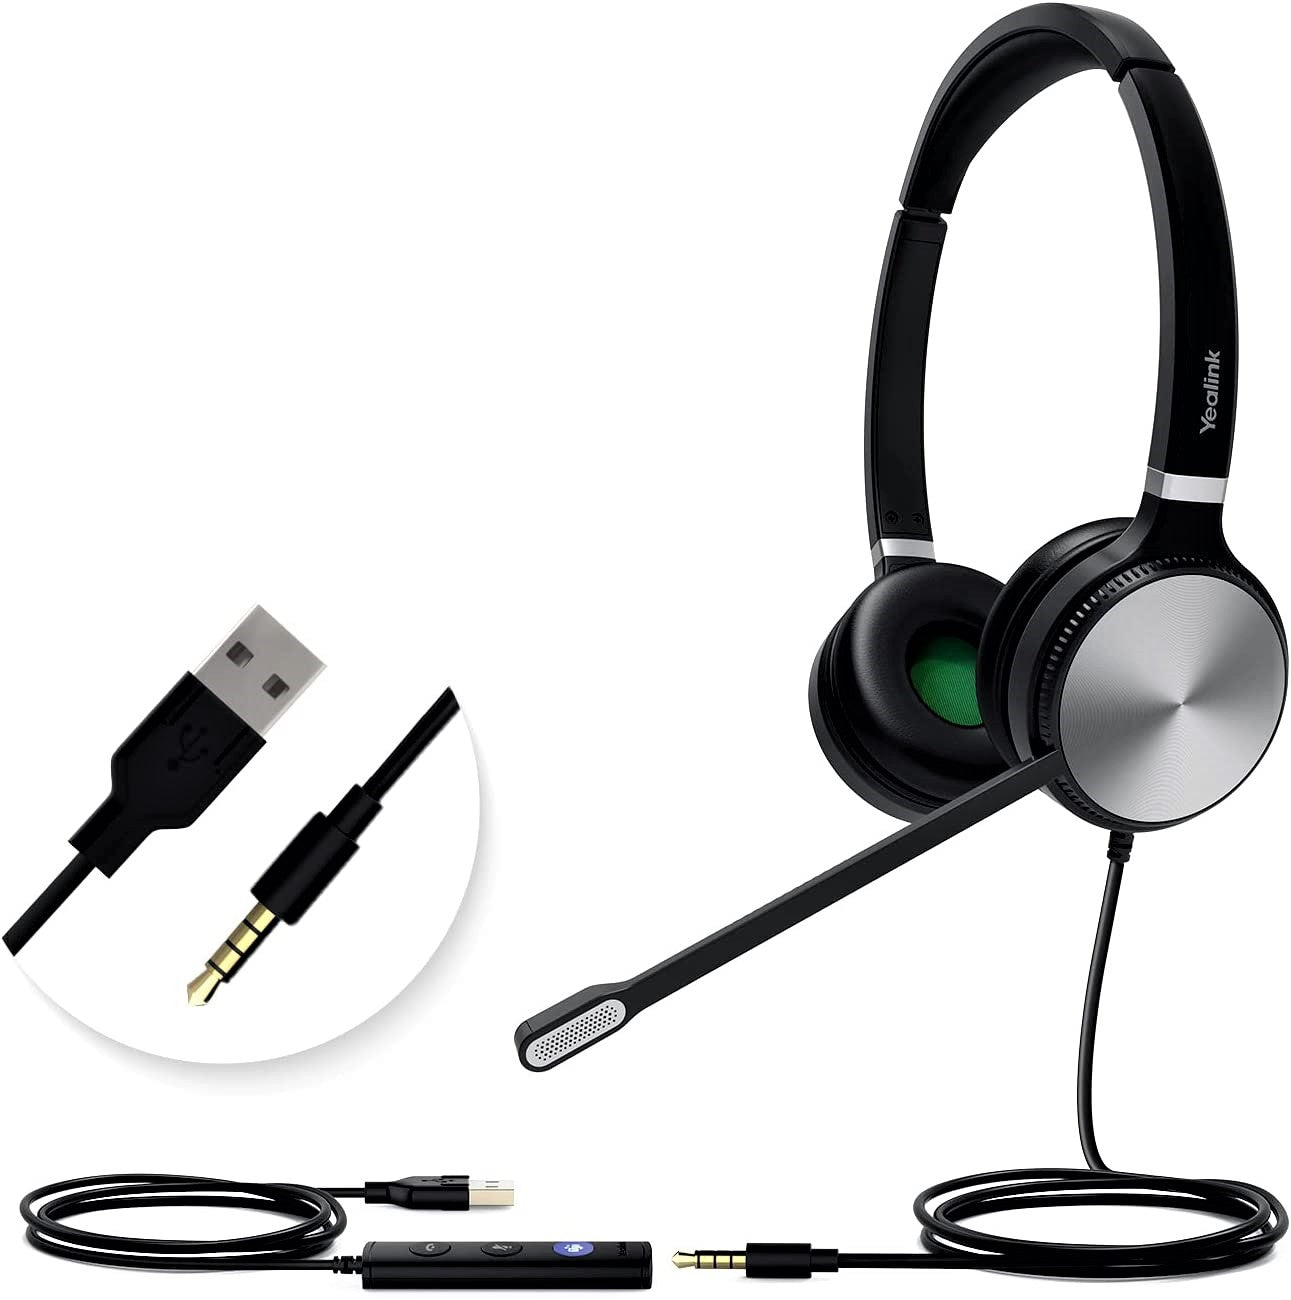 Yealink UH36 Dual USB-A Wired Headset